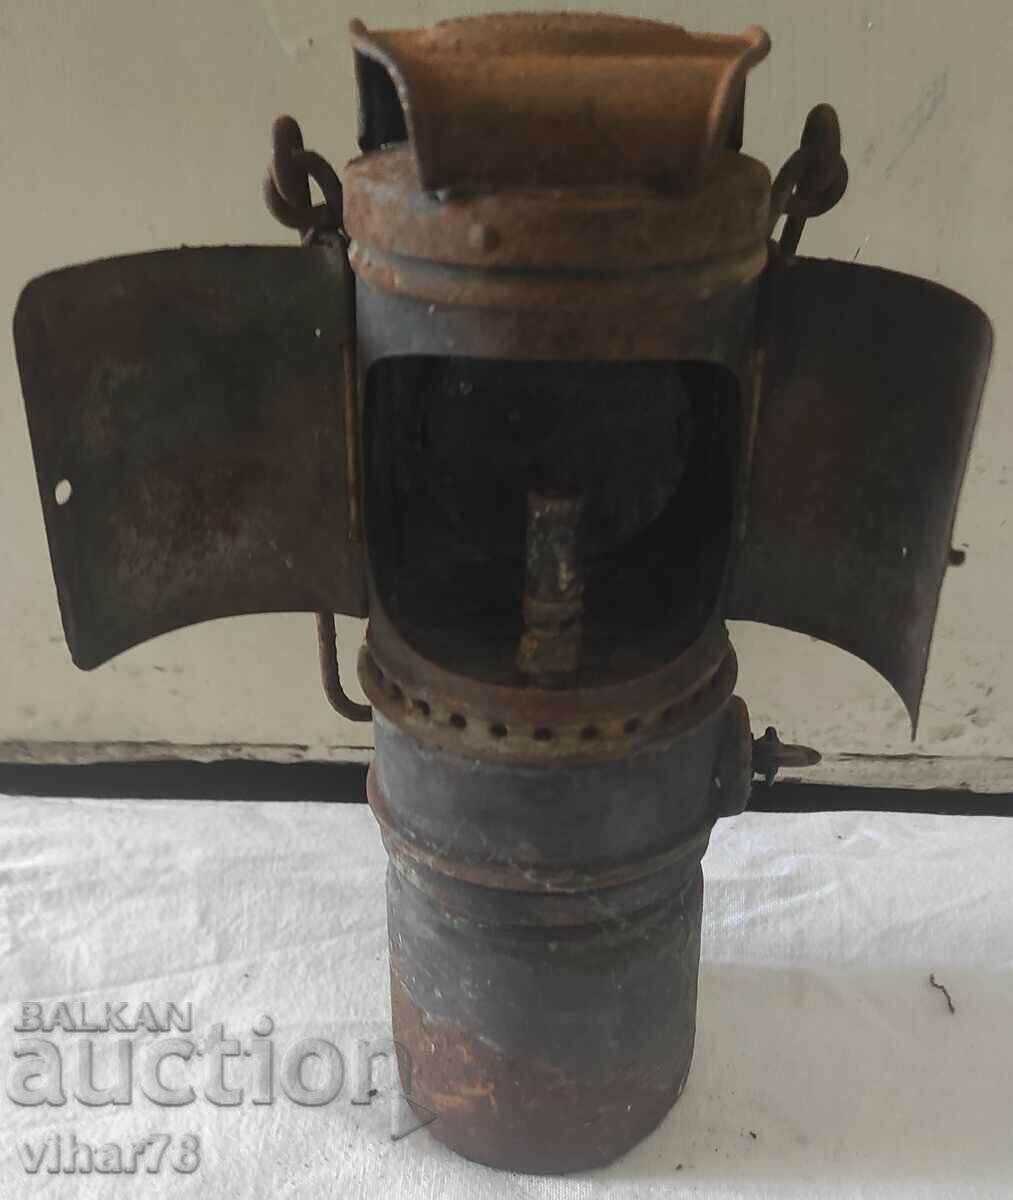 An old miner's lamp